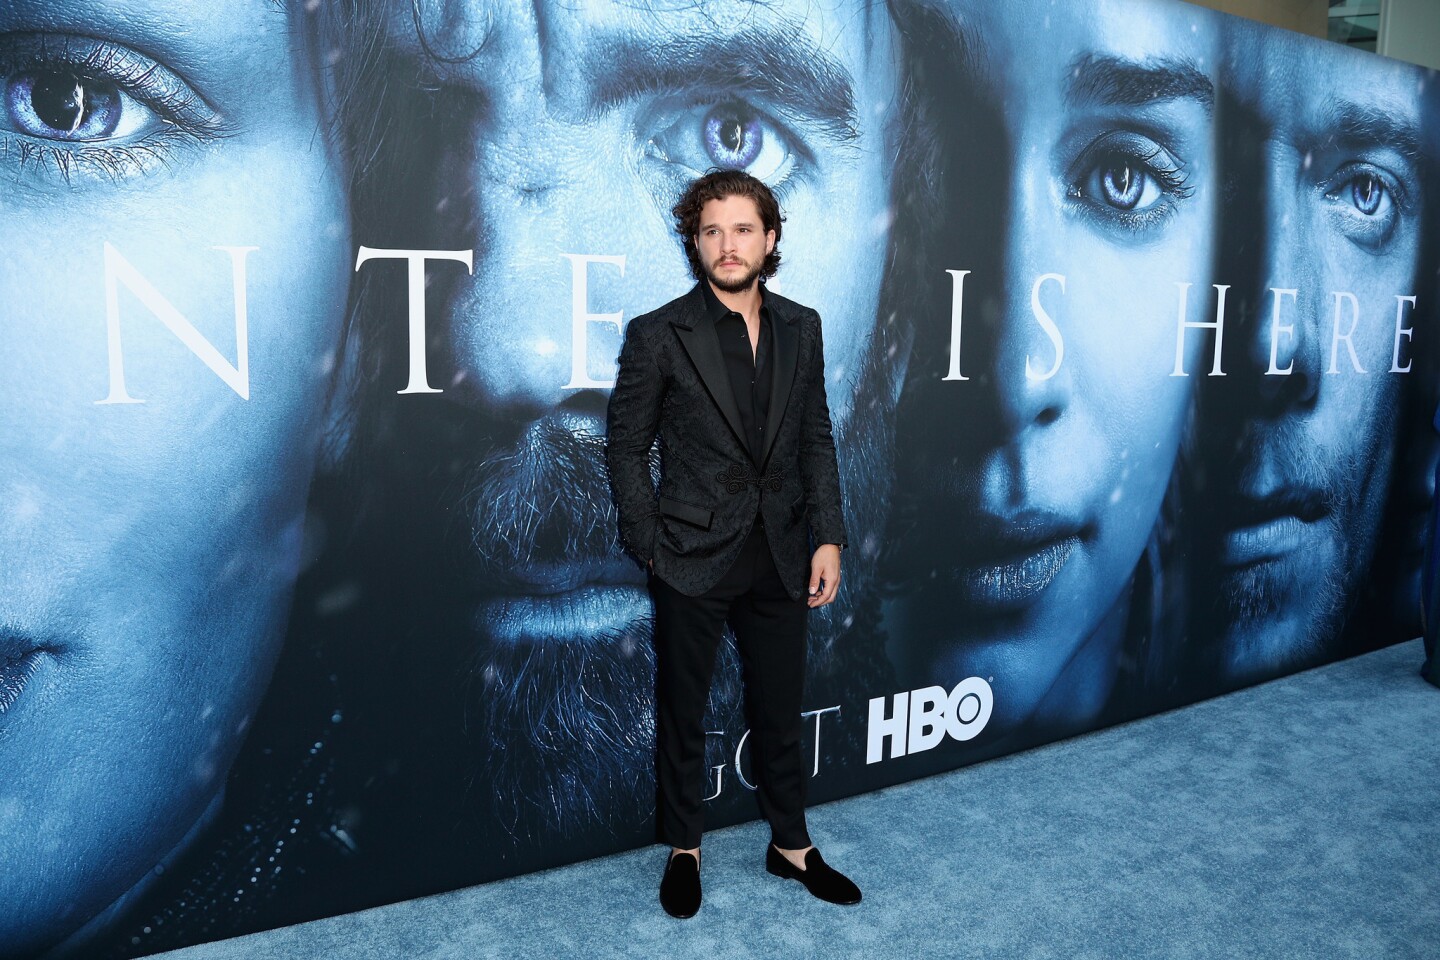 Actor Kit Harington (Jon Snow) attends the premiere of HBO's "Game Of Thrones" season 7 at Walt Disney Concert Hall.